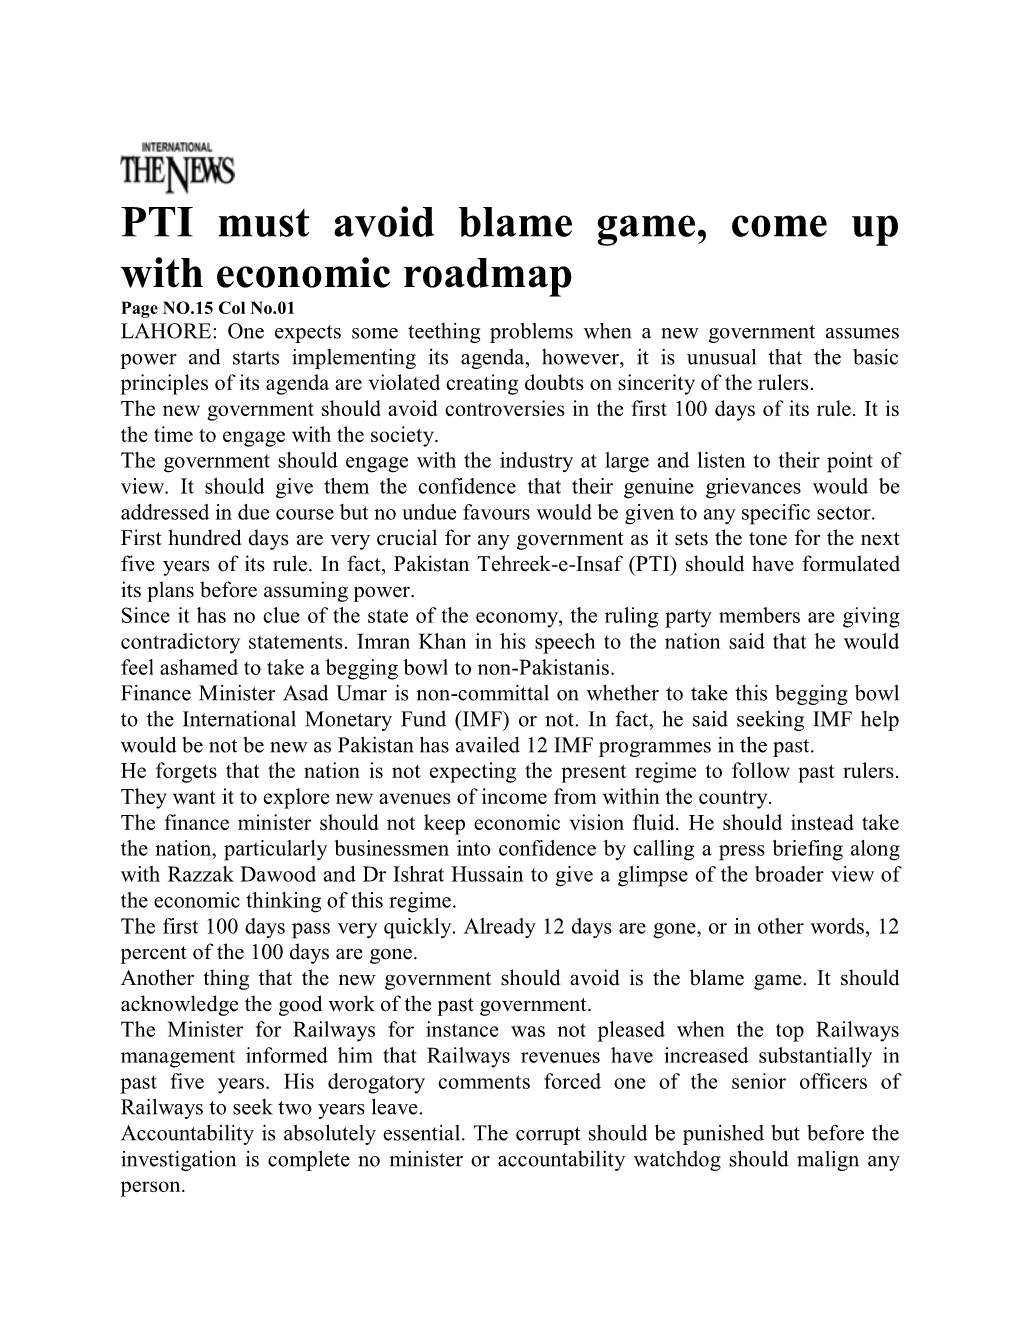 PTI Must Avoid Blame Game, Come up with Economic Roadmap